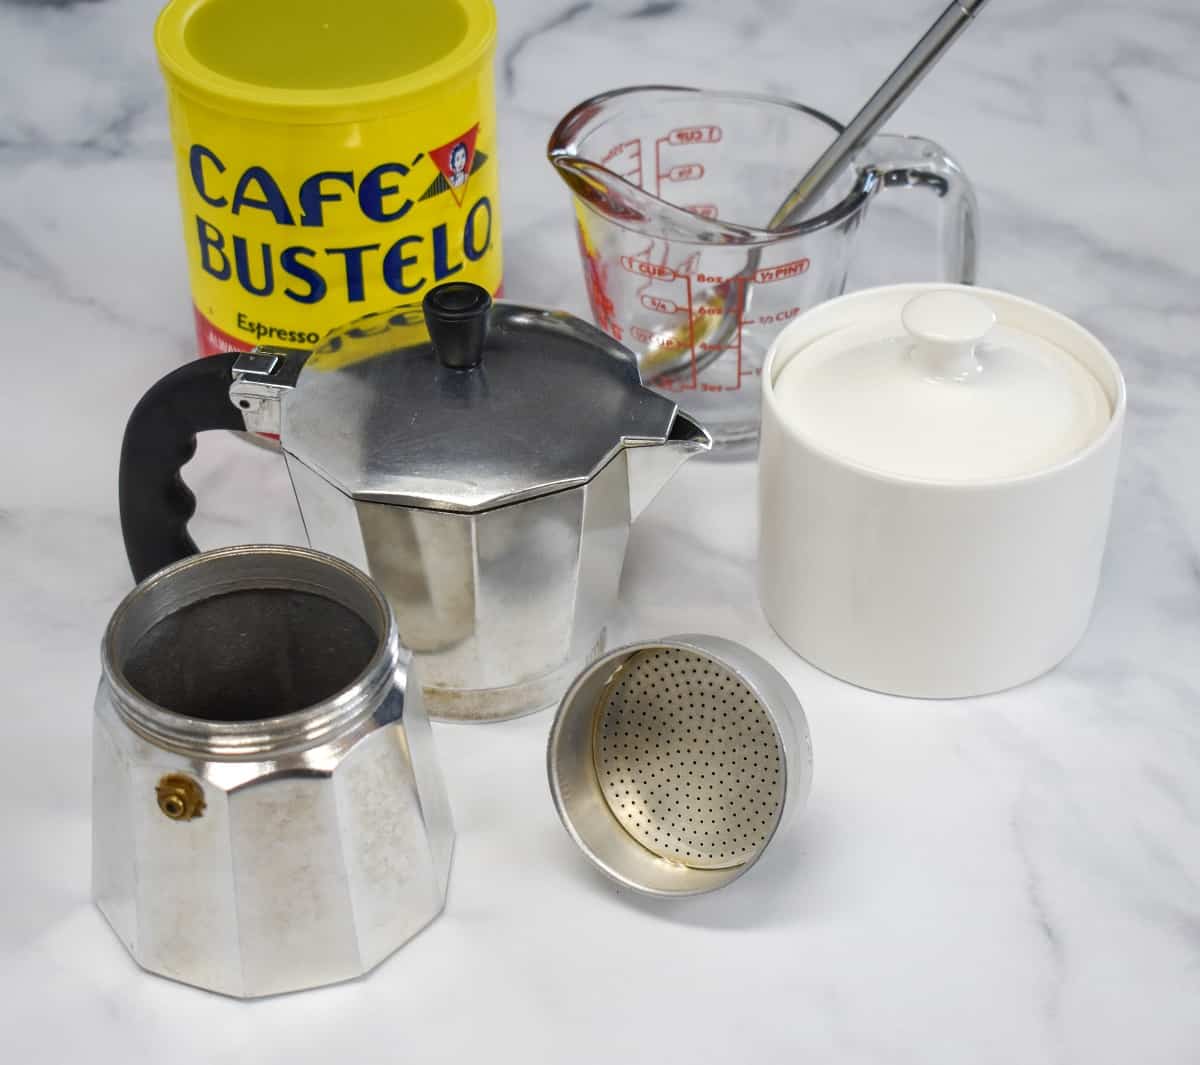 The ingredients and appliance used to make Cuban coffee arranged on a white table.